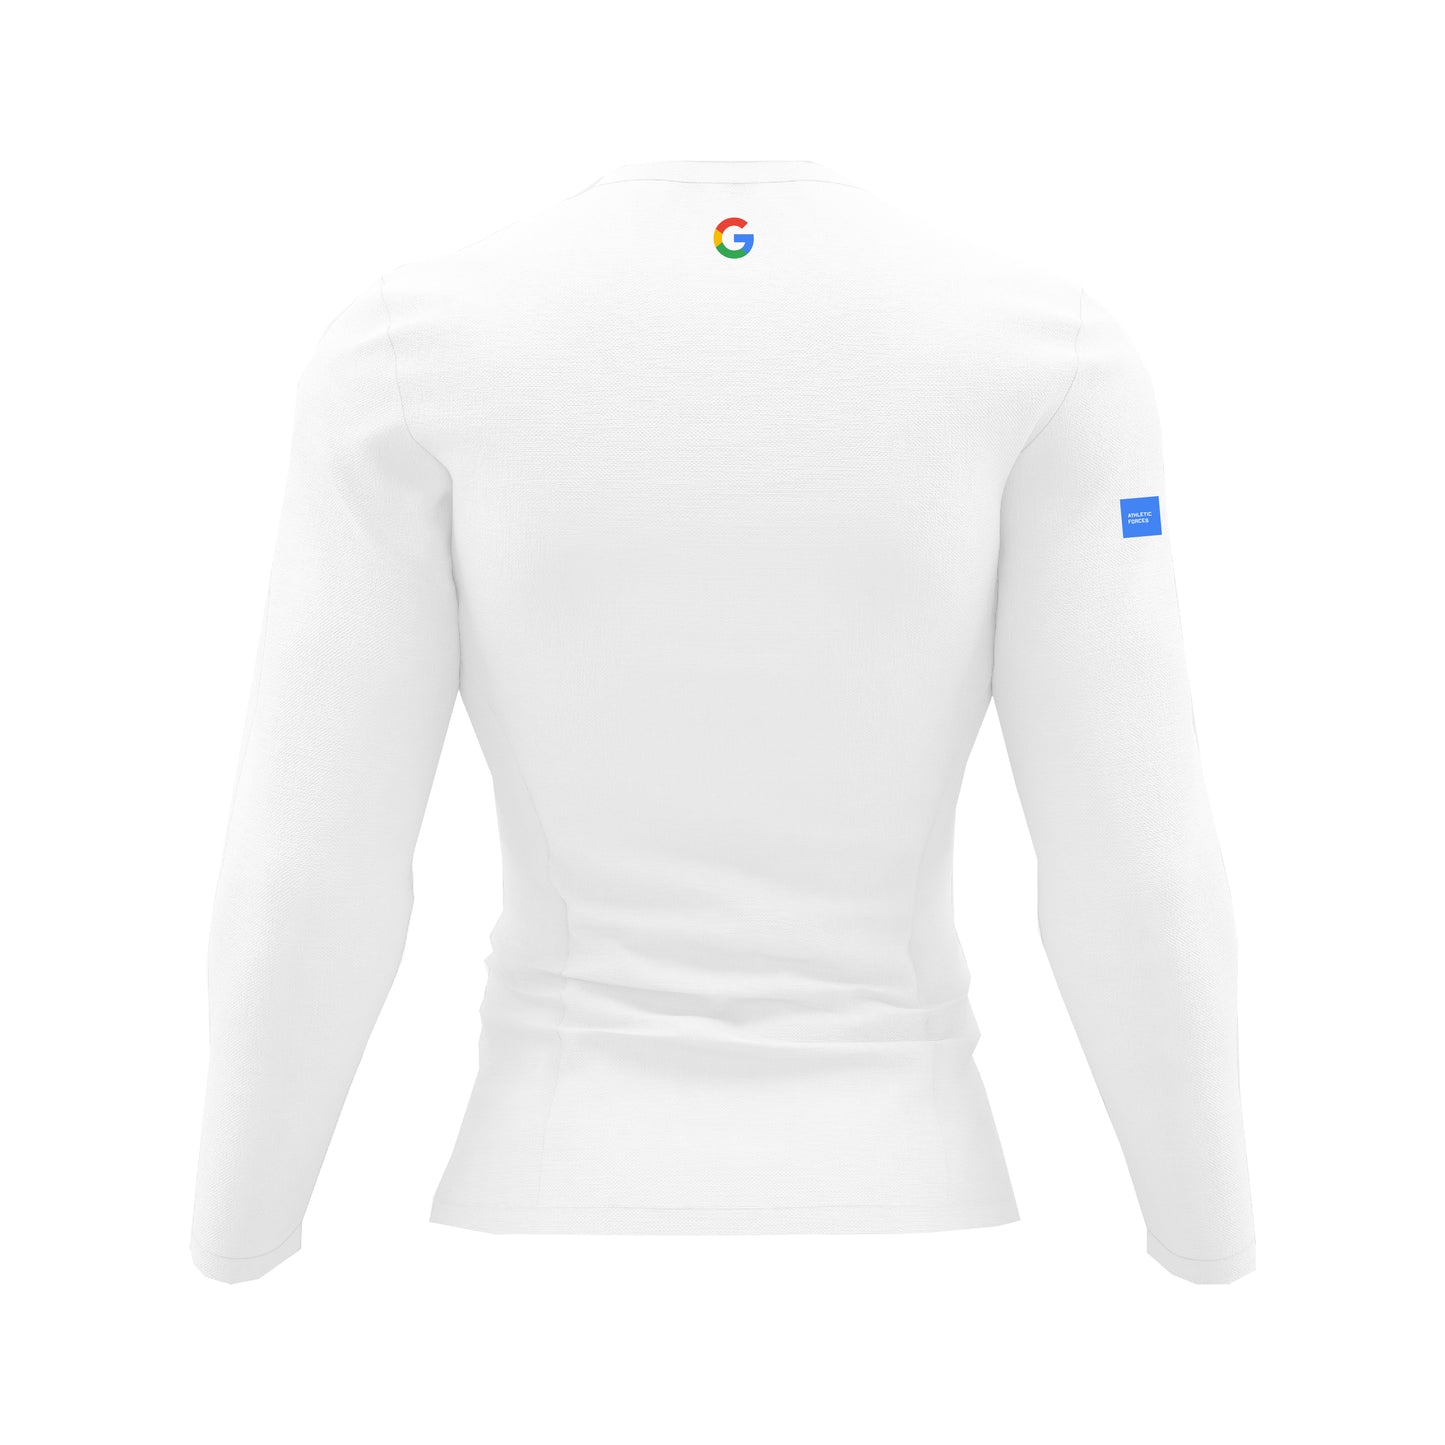 Google - Cyber Force ® Sweatshirt by Athletic Forces -  Model 2